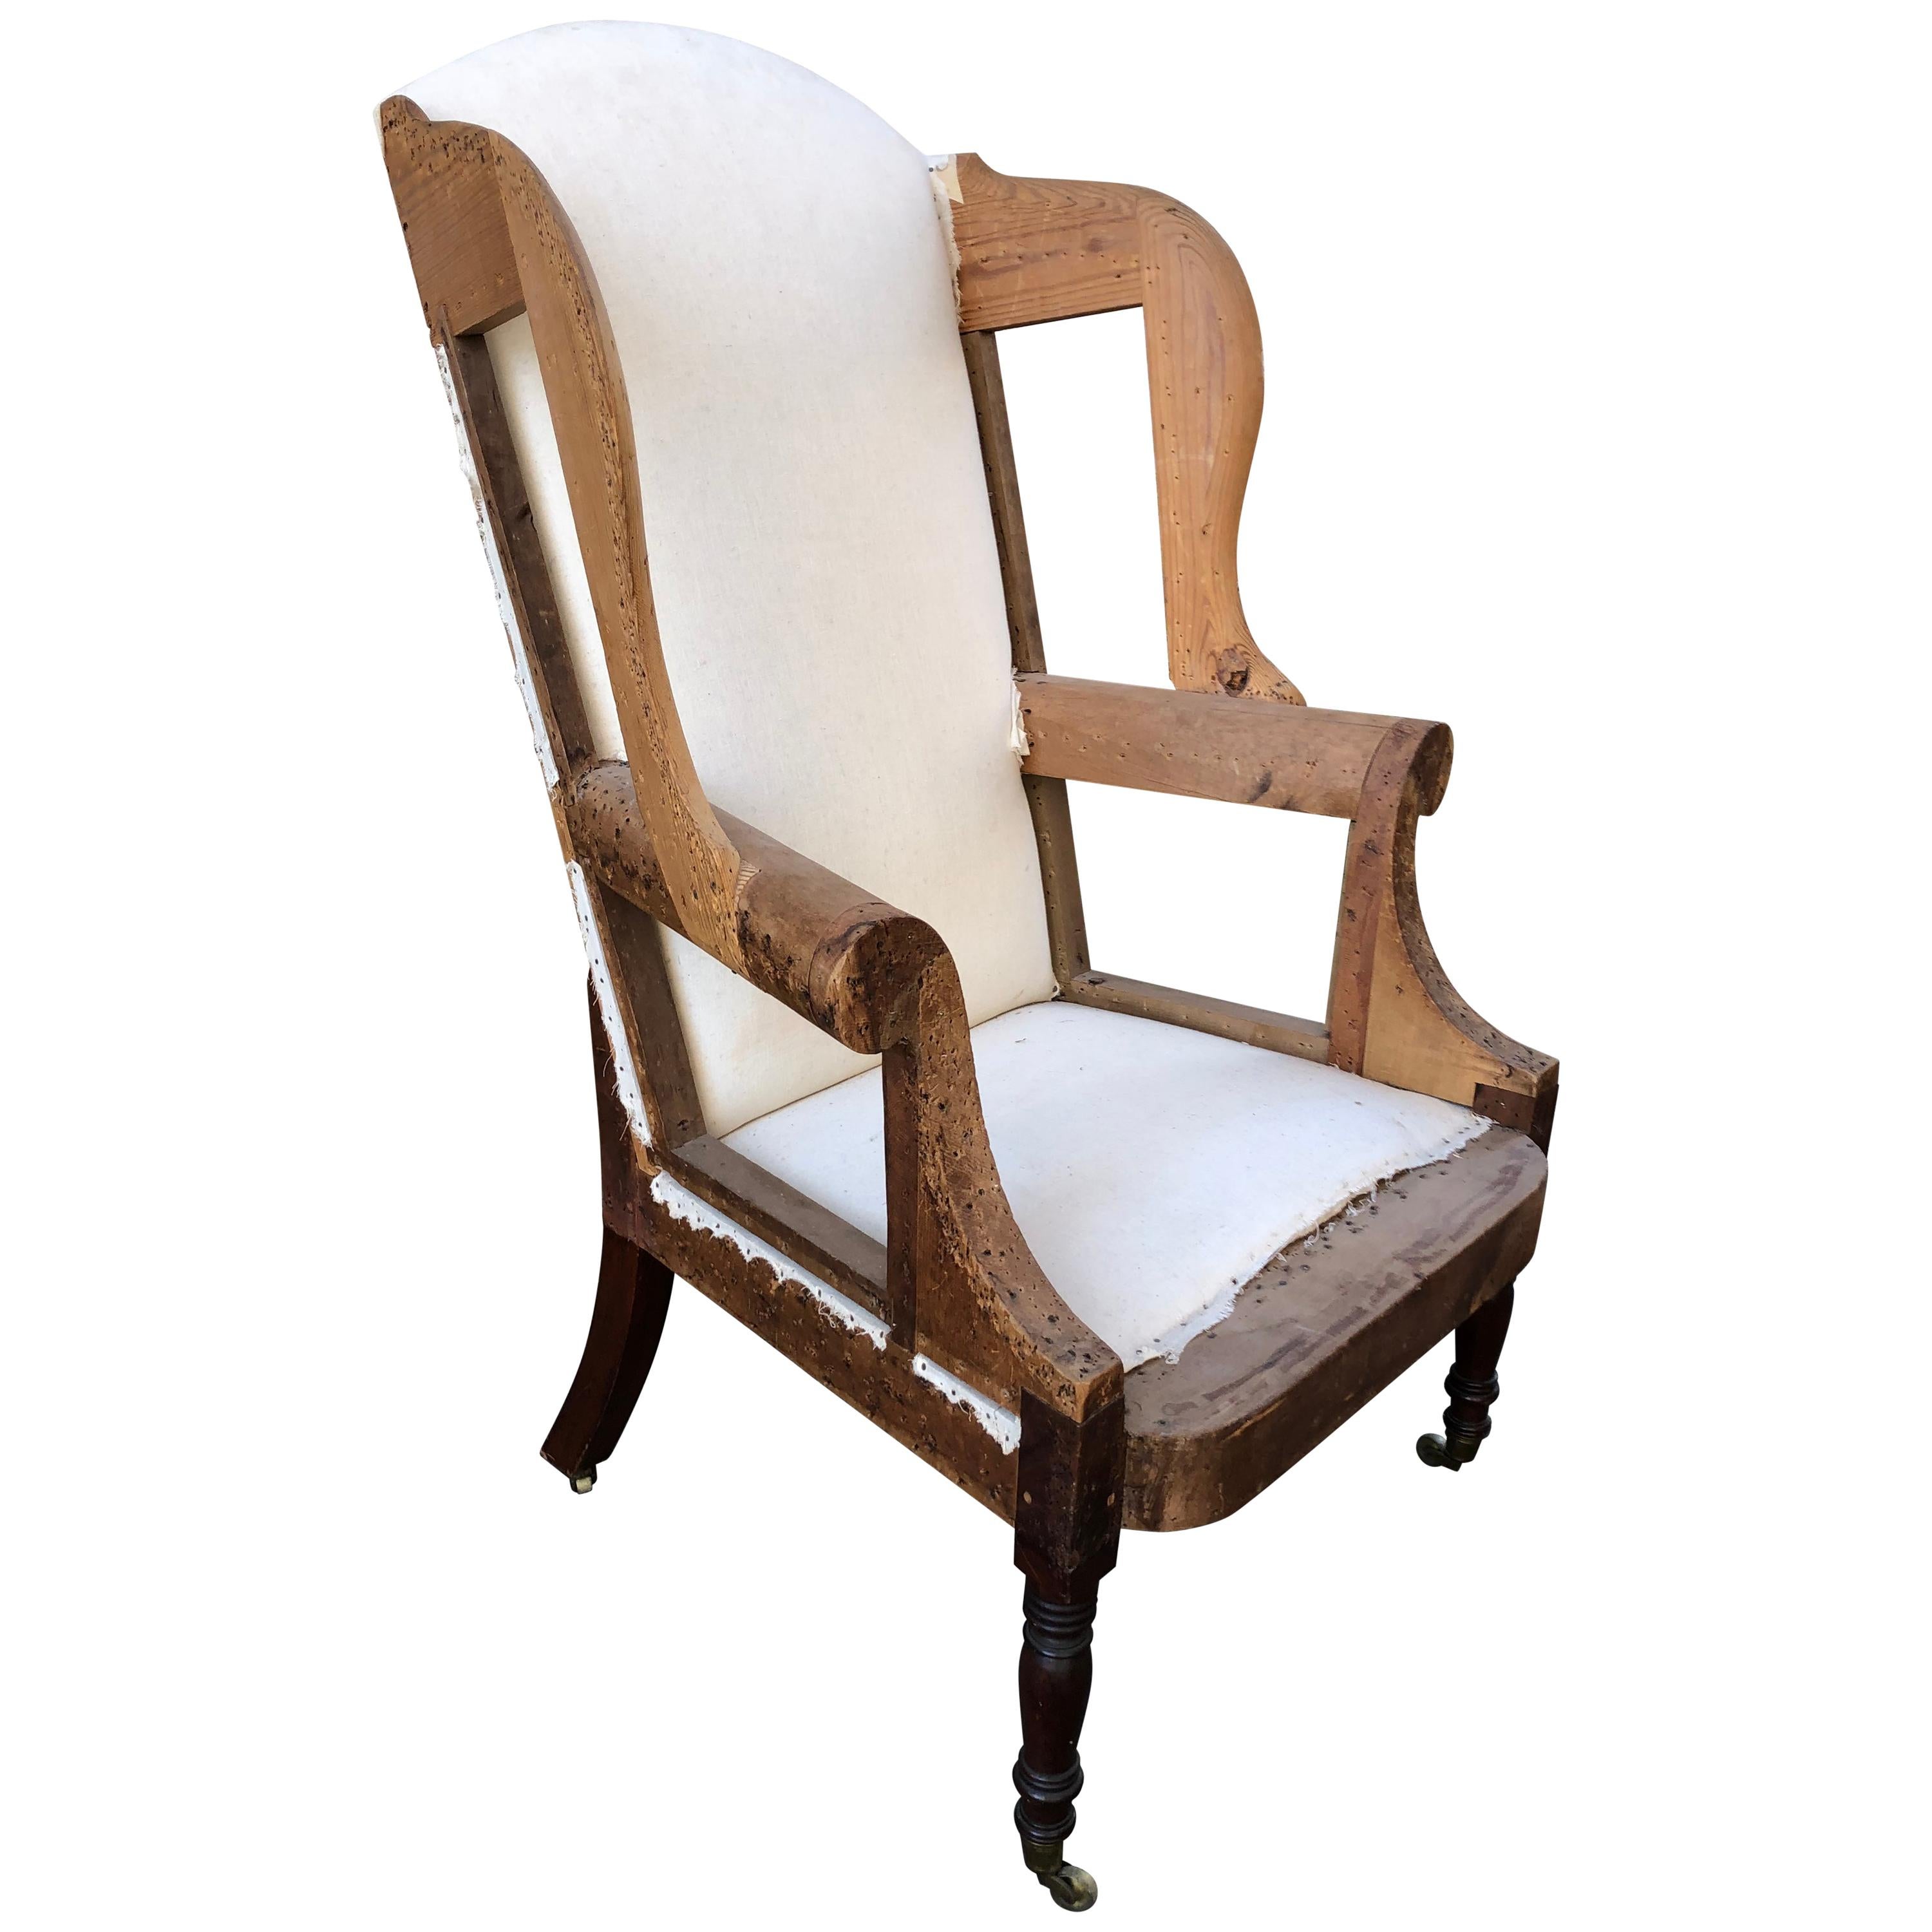 American Southern Wing Back Chair with Mahogany Turned Legs, circa 1810